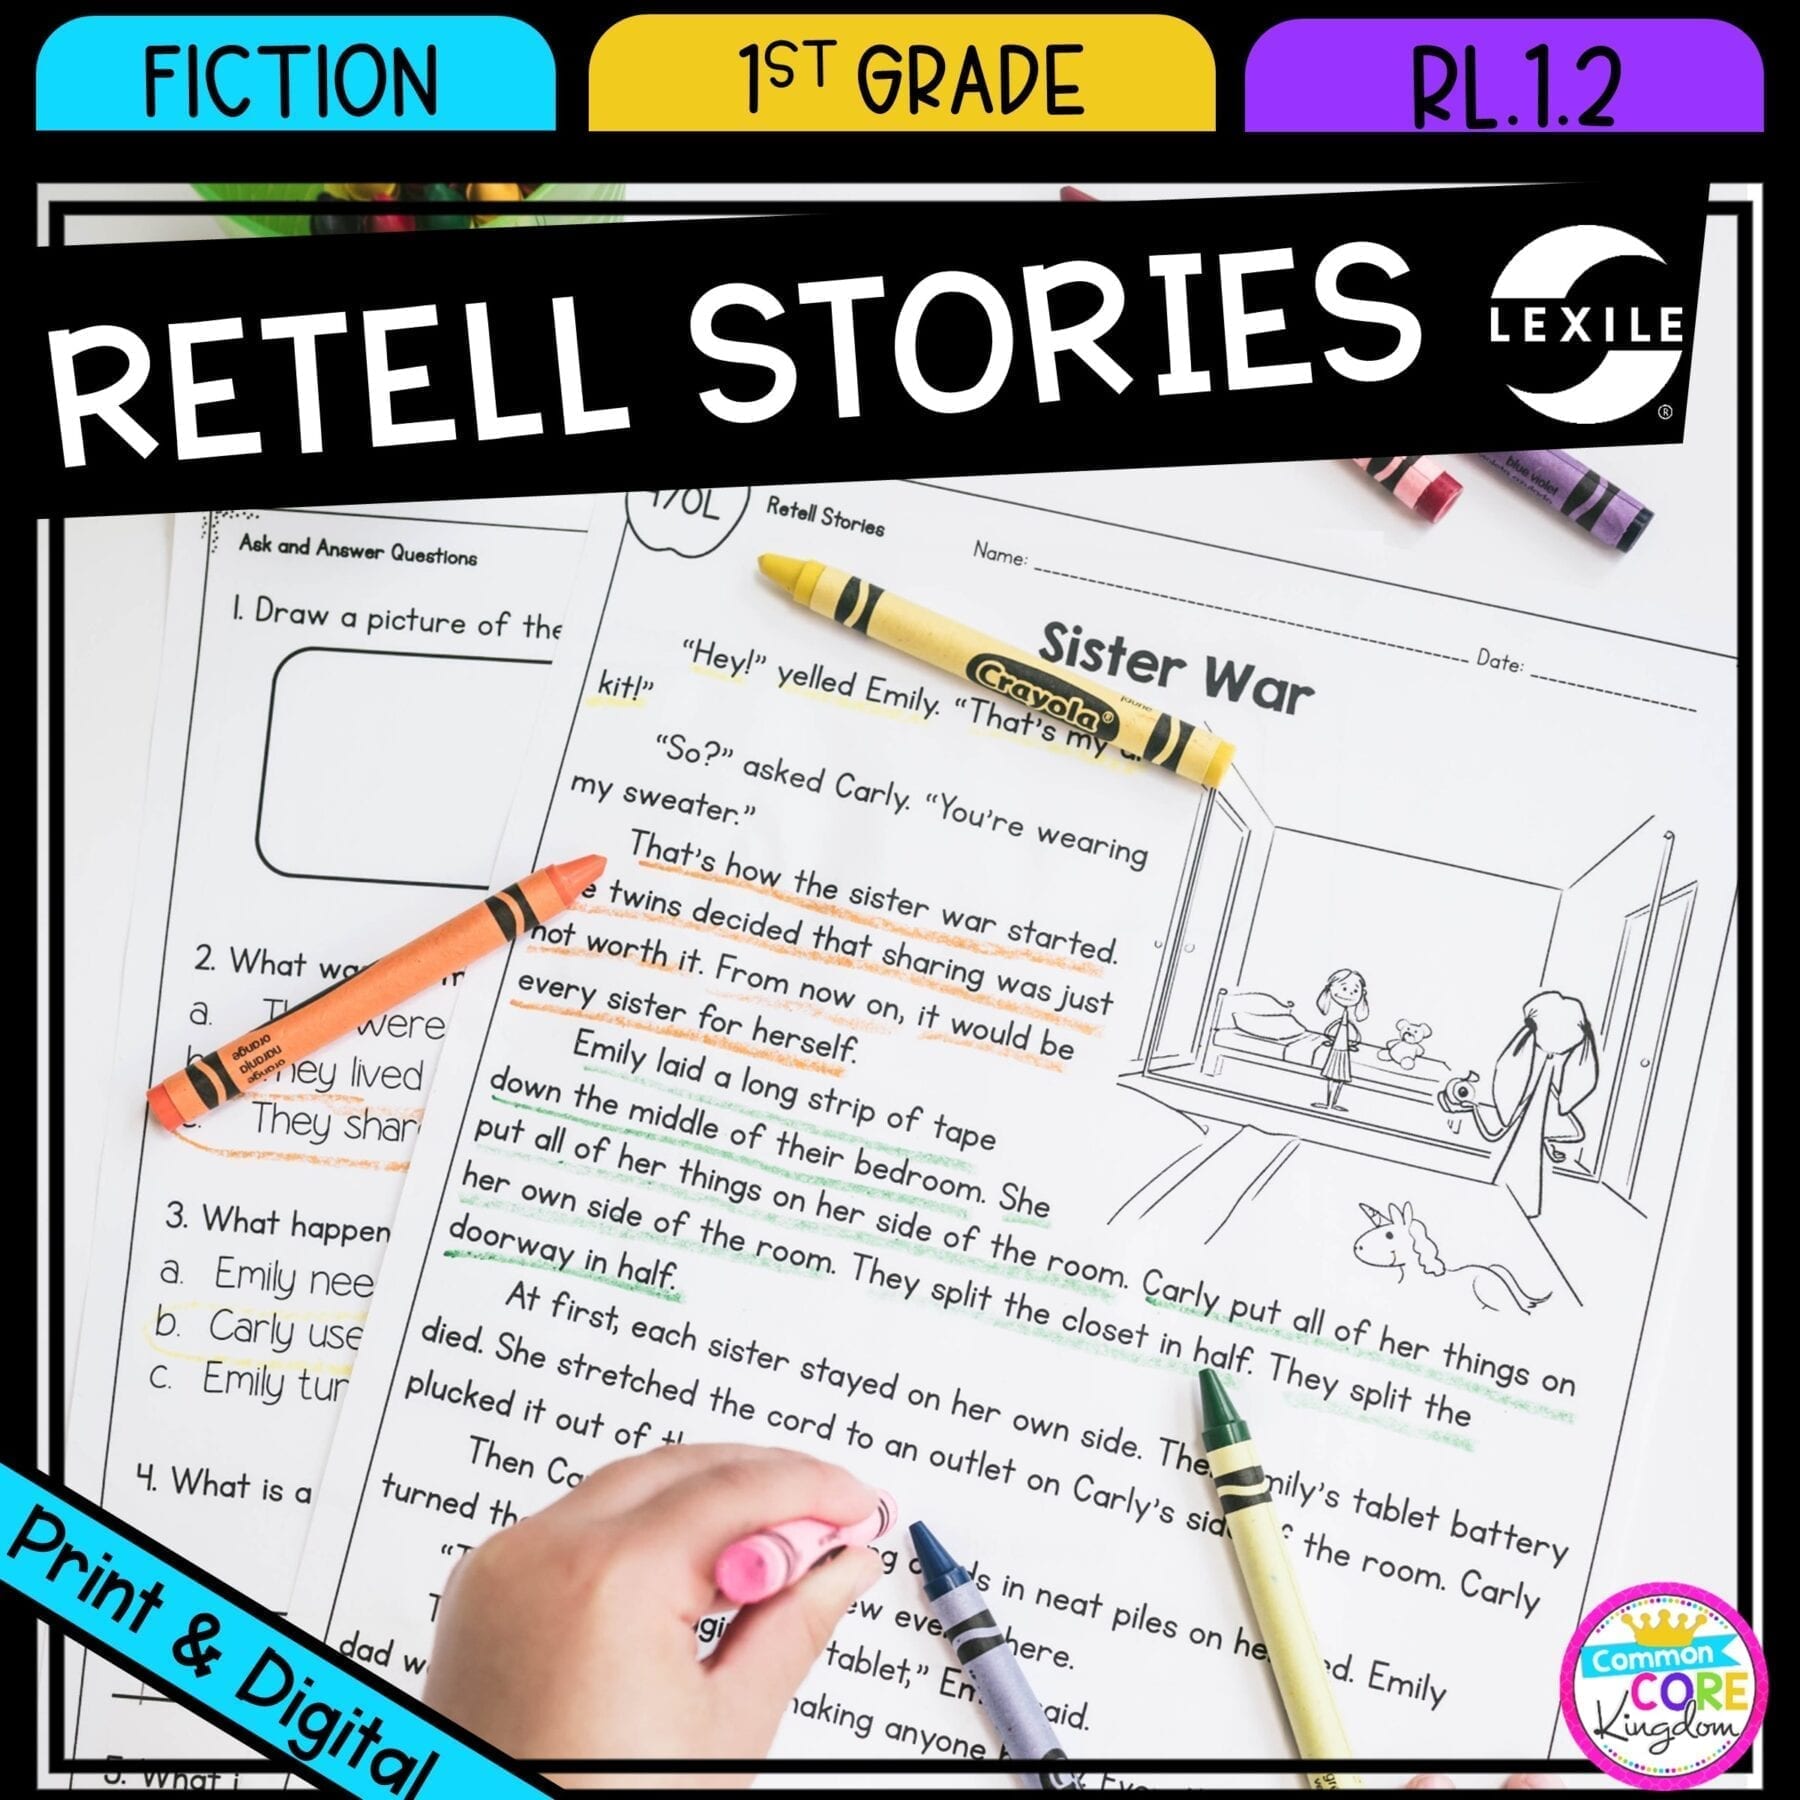 Retell Stories for 1st grade cover showing printable and digital worksheets